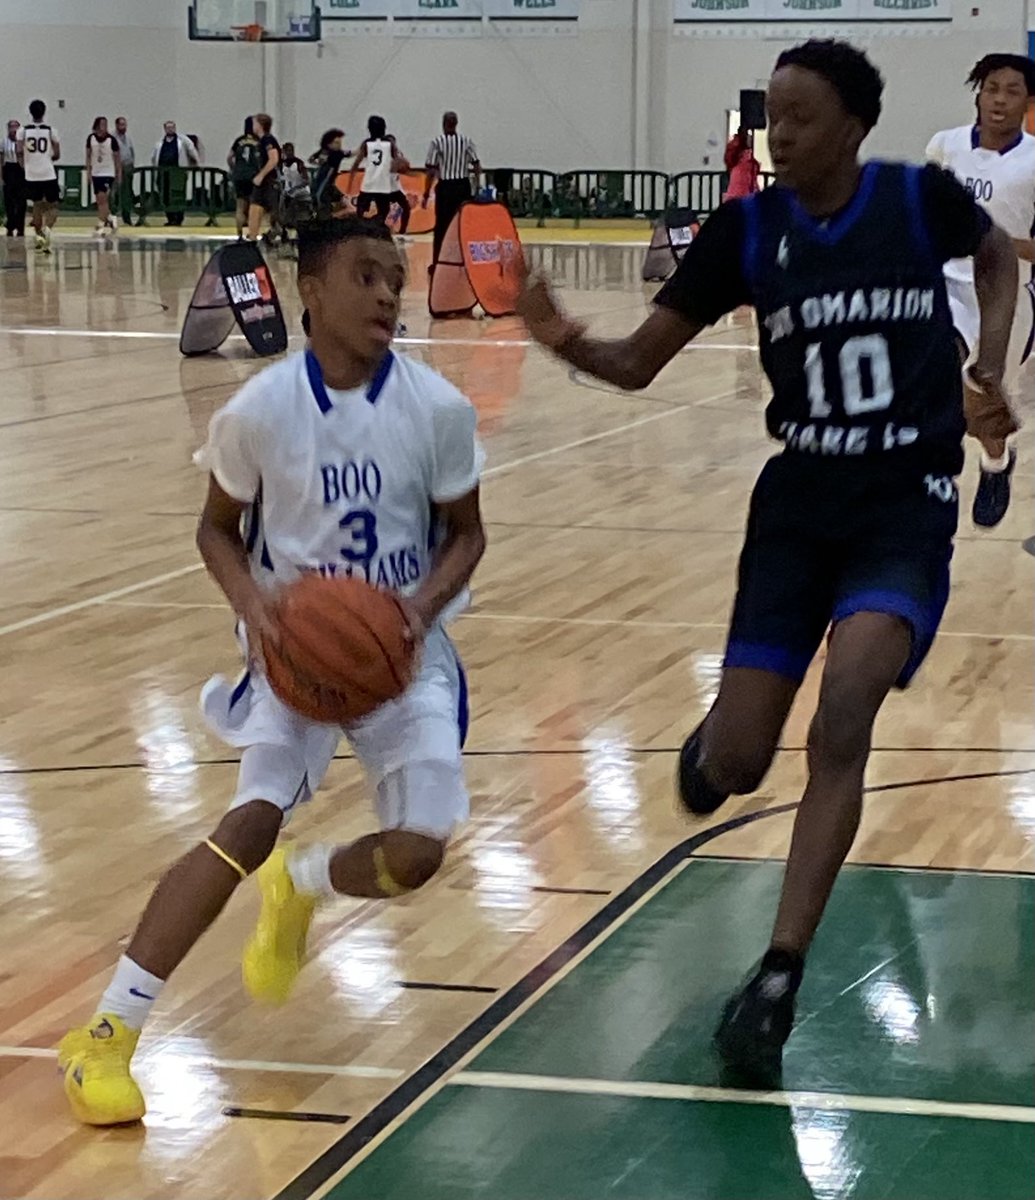 Boo Williams 2029 guard Aidyn Jones drives against Rate 1’s. Jones earned MVP honors with a 19 point performance. #BigShots #VATipOff ⁦@BigShotsToday⁩ ⁦@BigShotsGlobal⁩